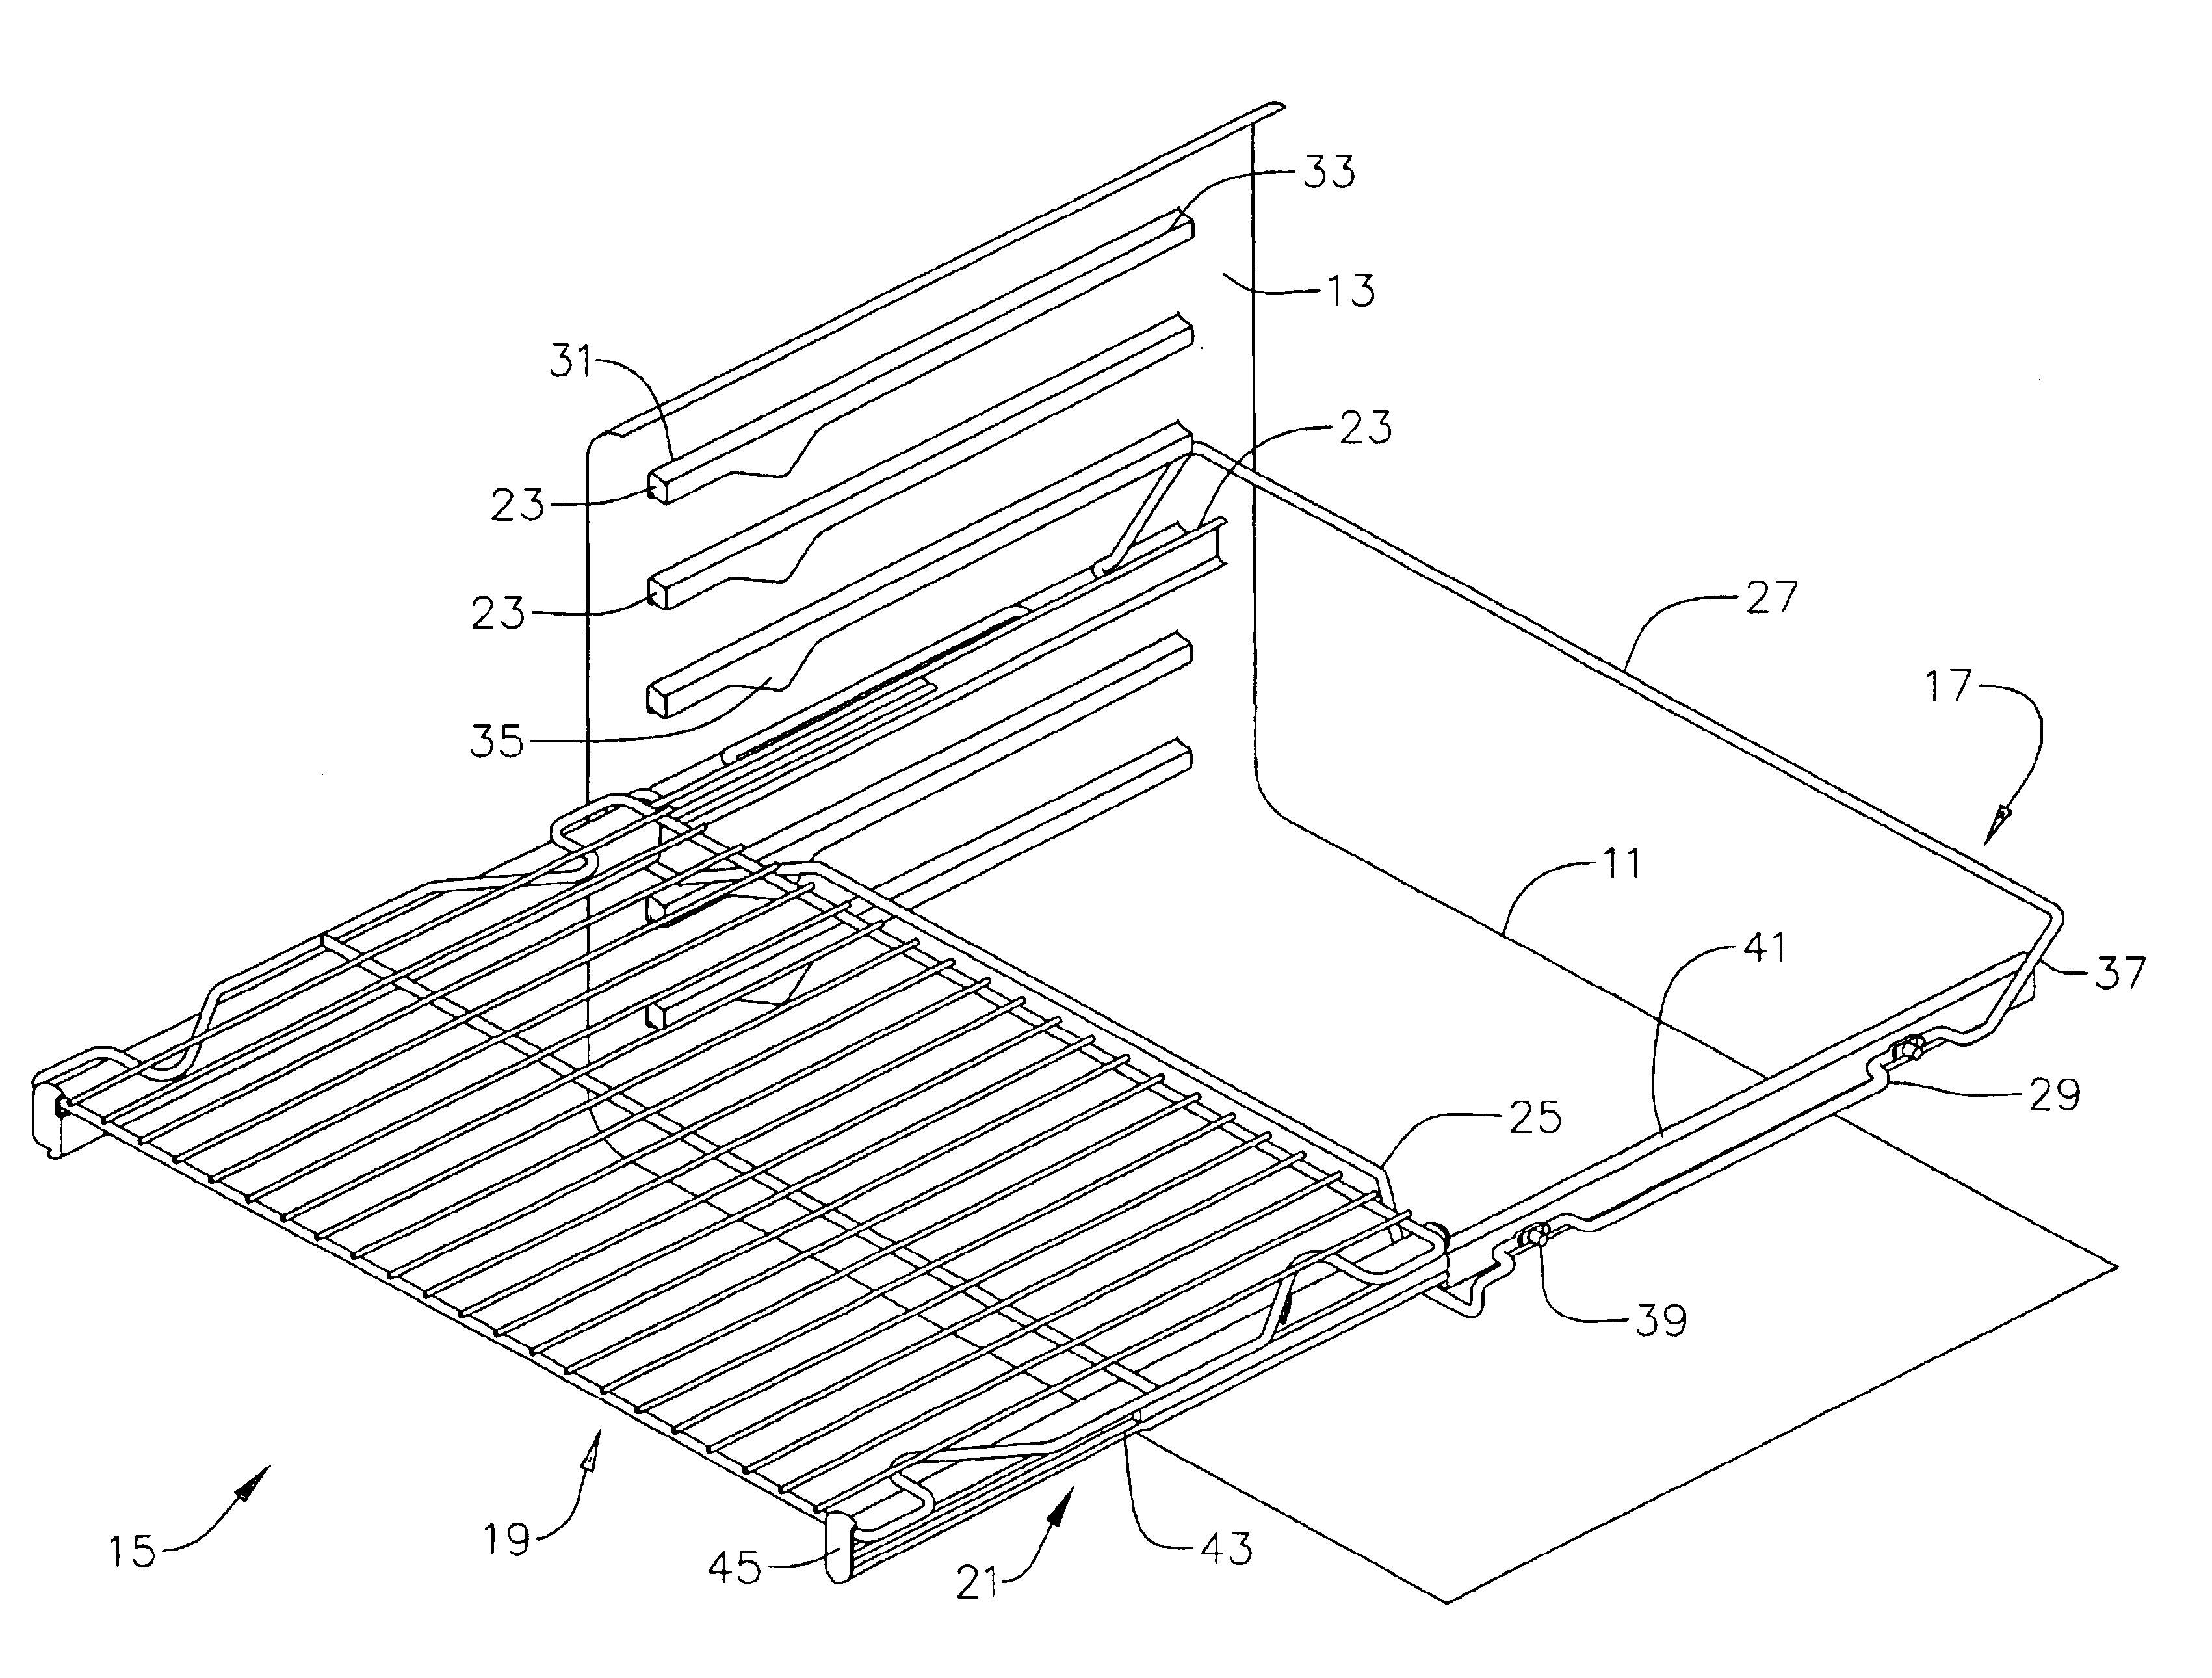 Oven assembly with slides